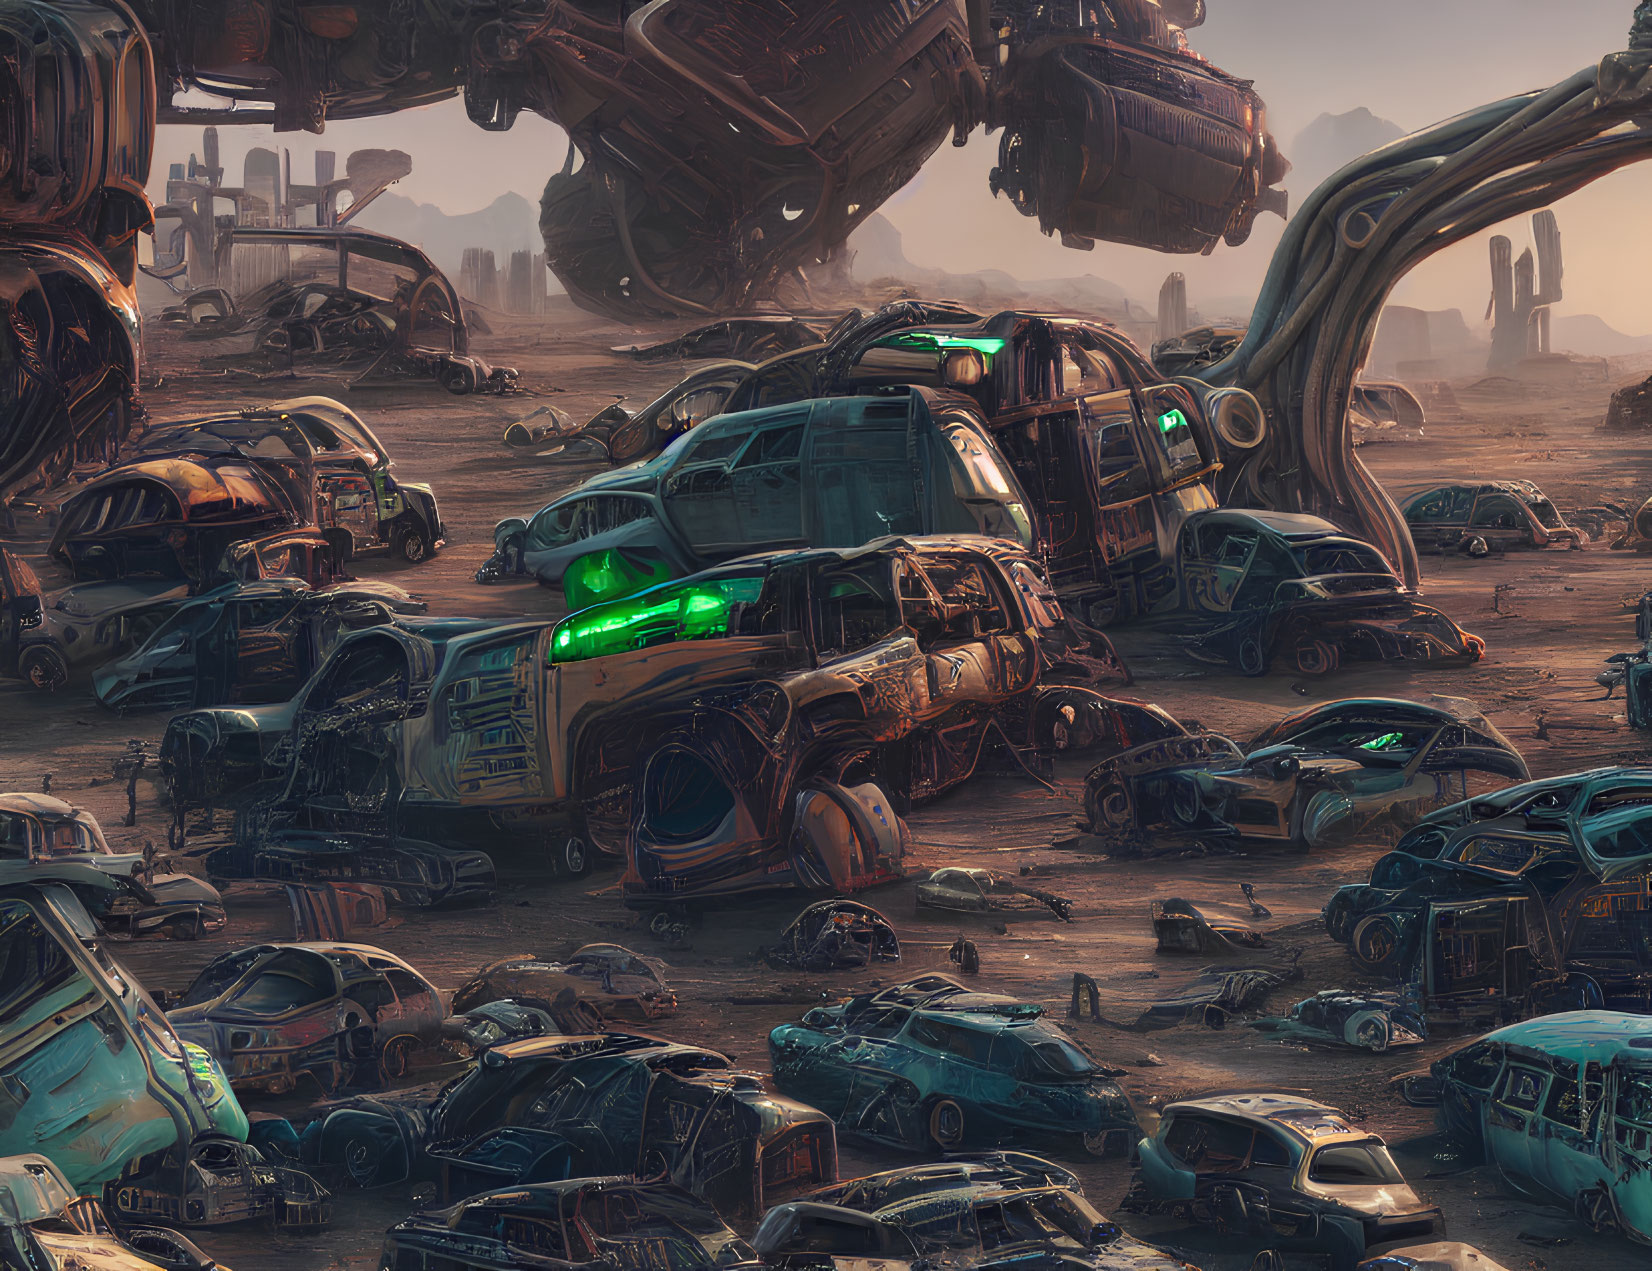 Dystopian scrapyard with derelict vehicles and towering robotic structures